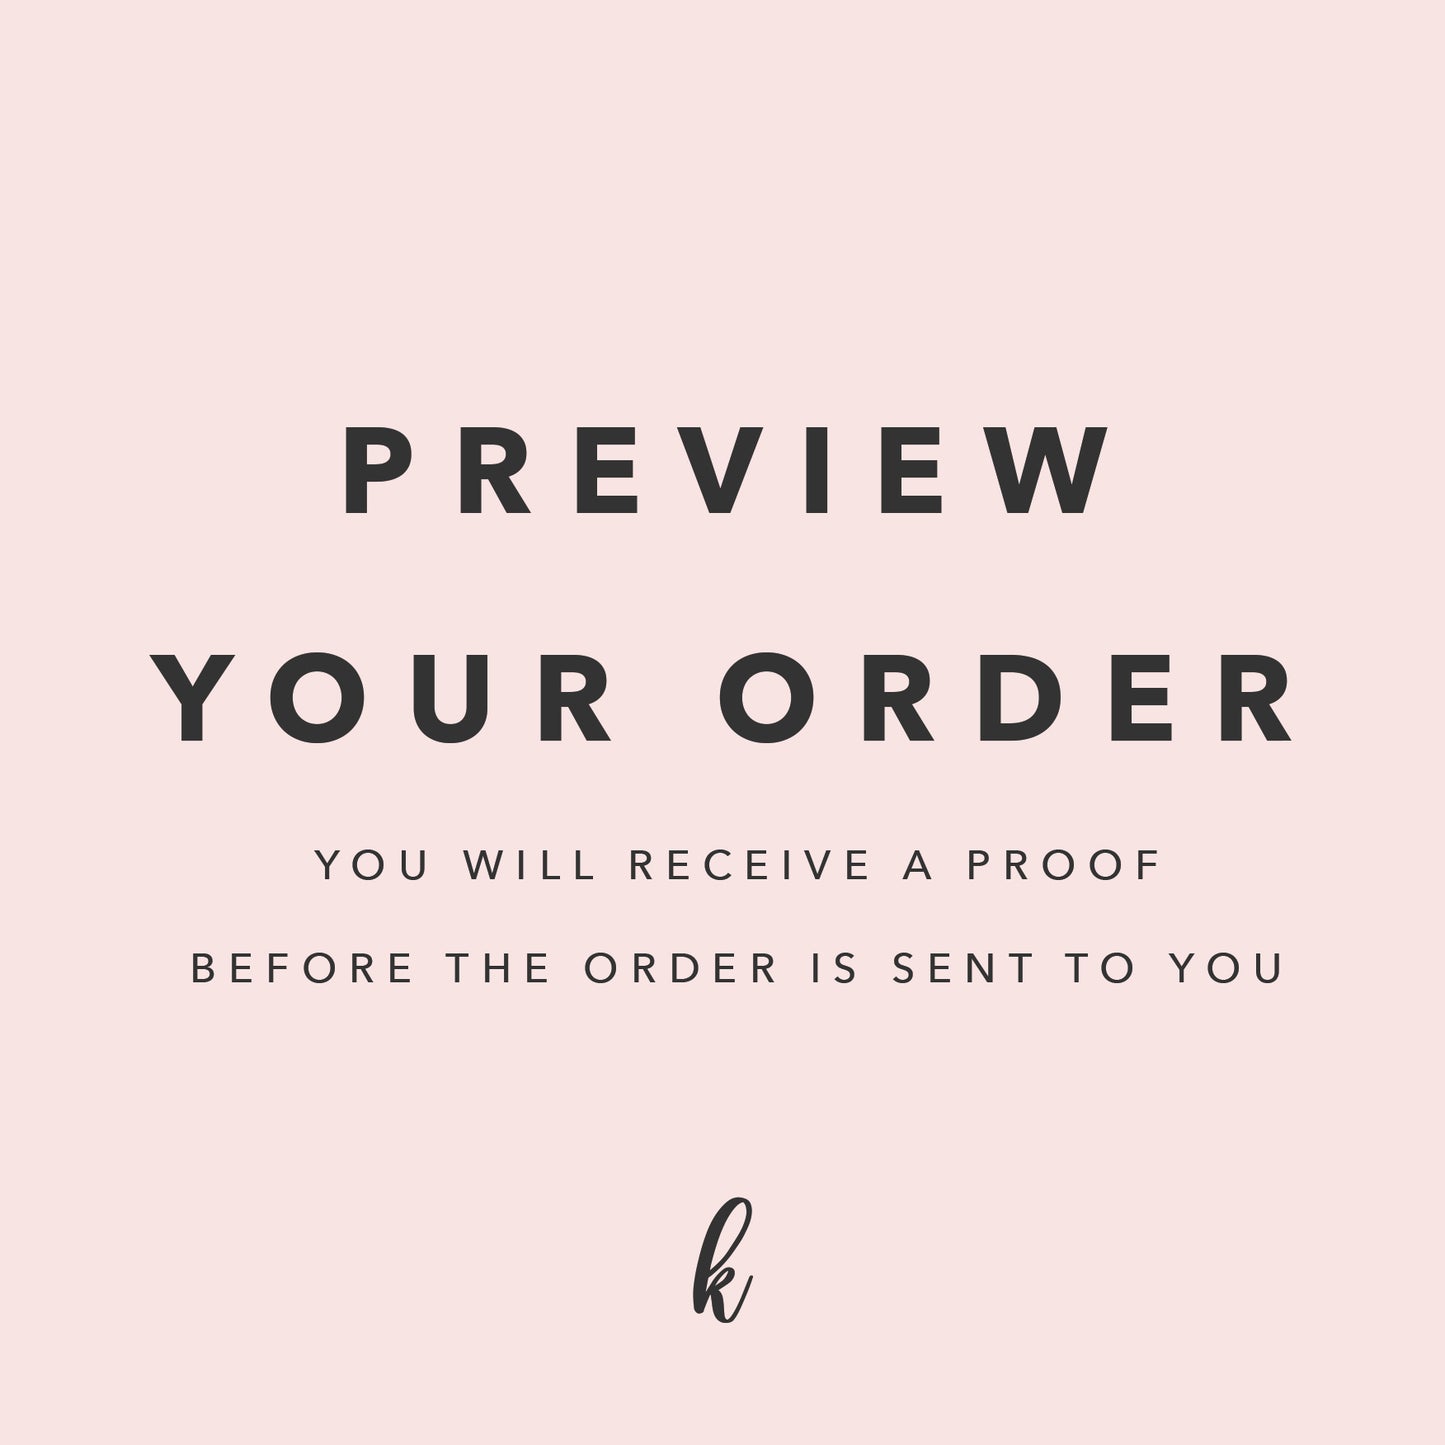 Wedding song lyrics - preview your order